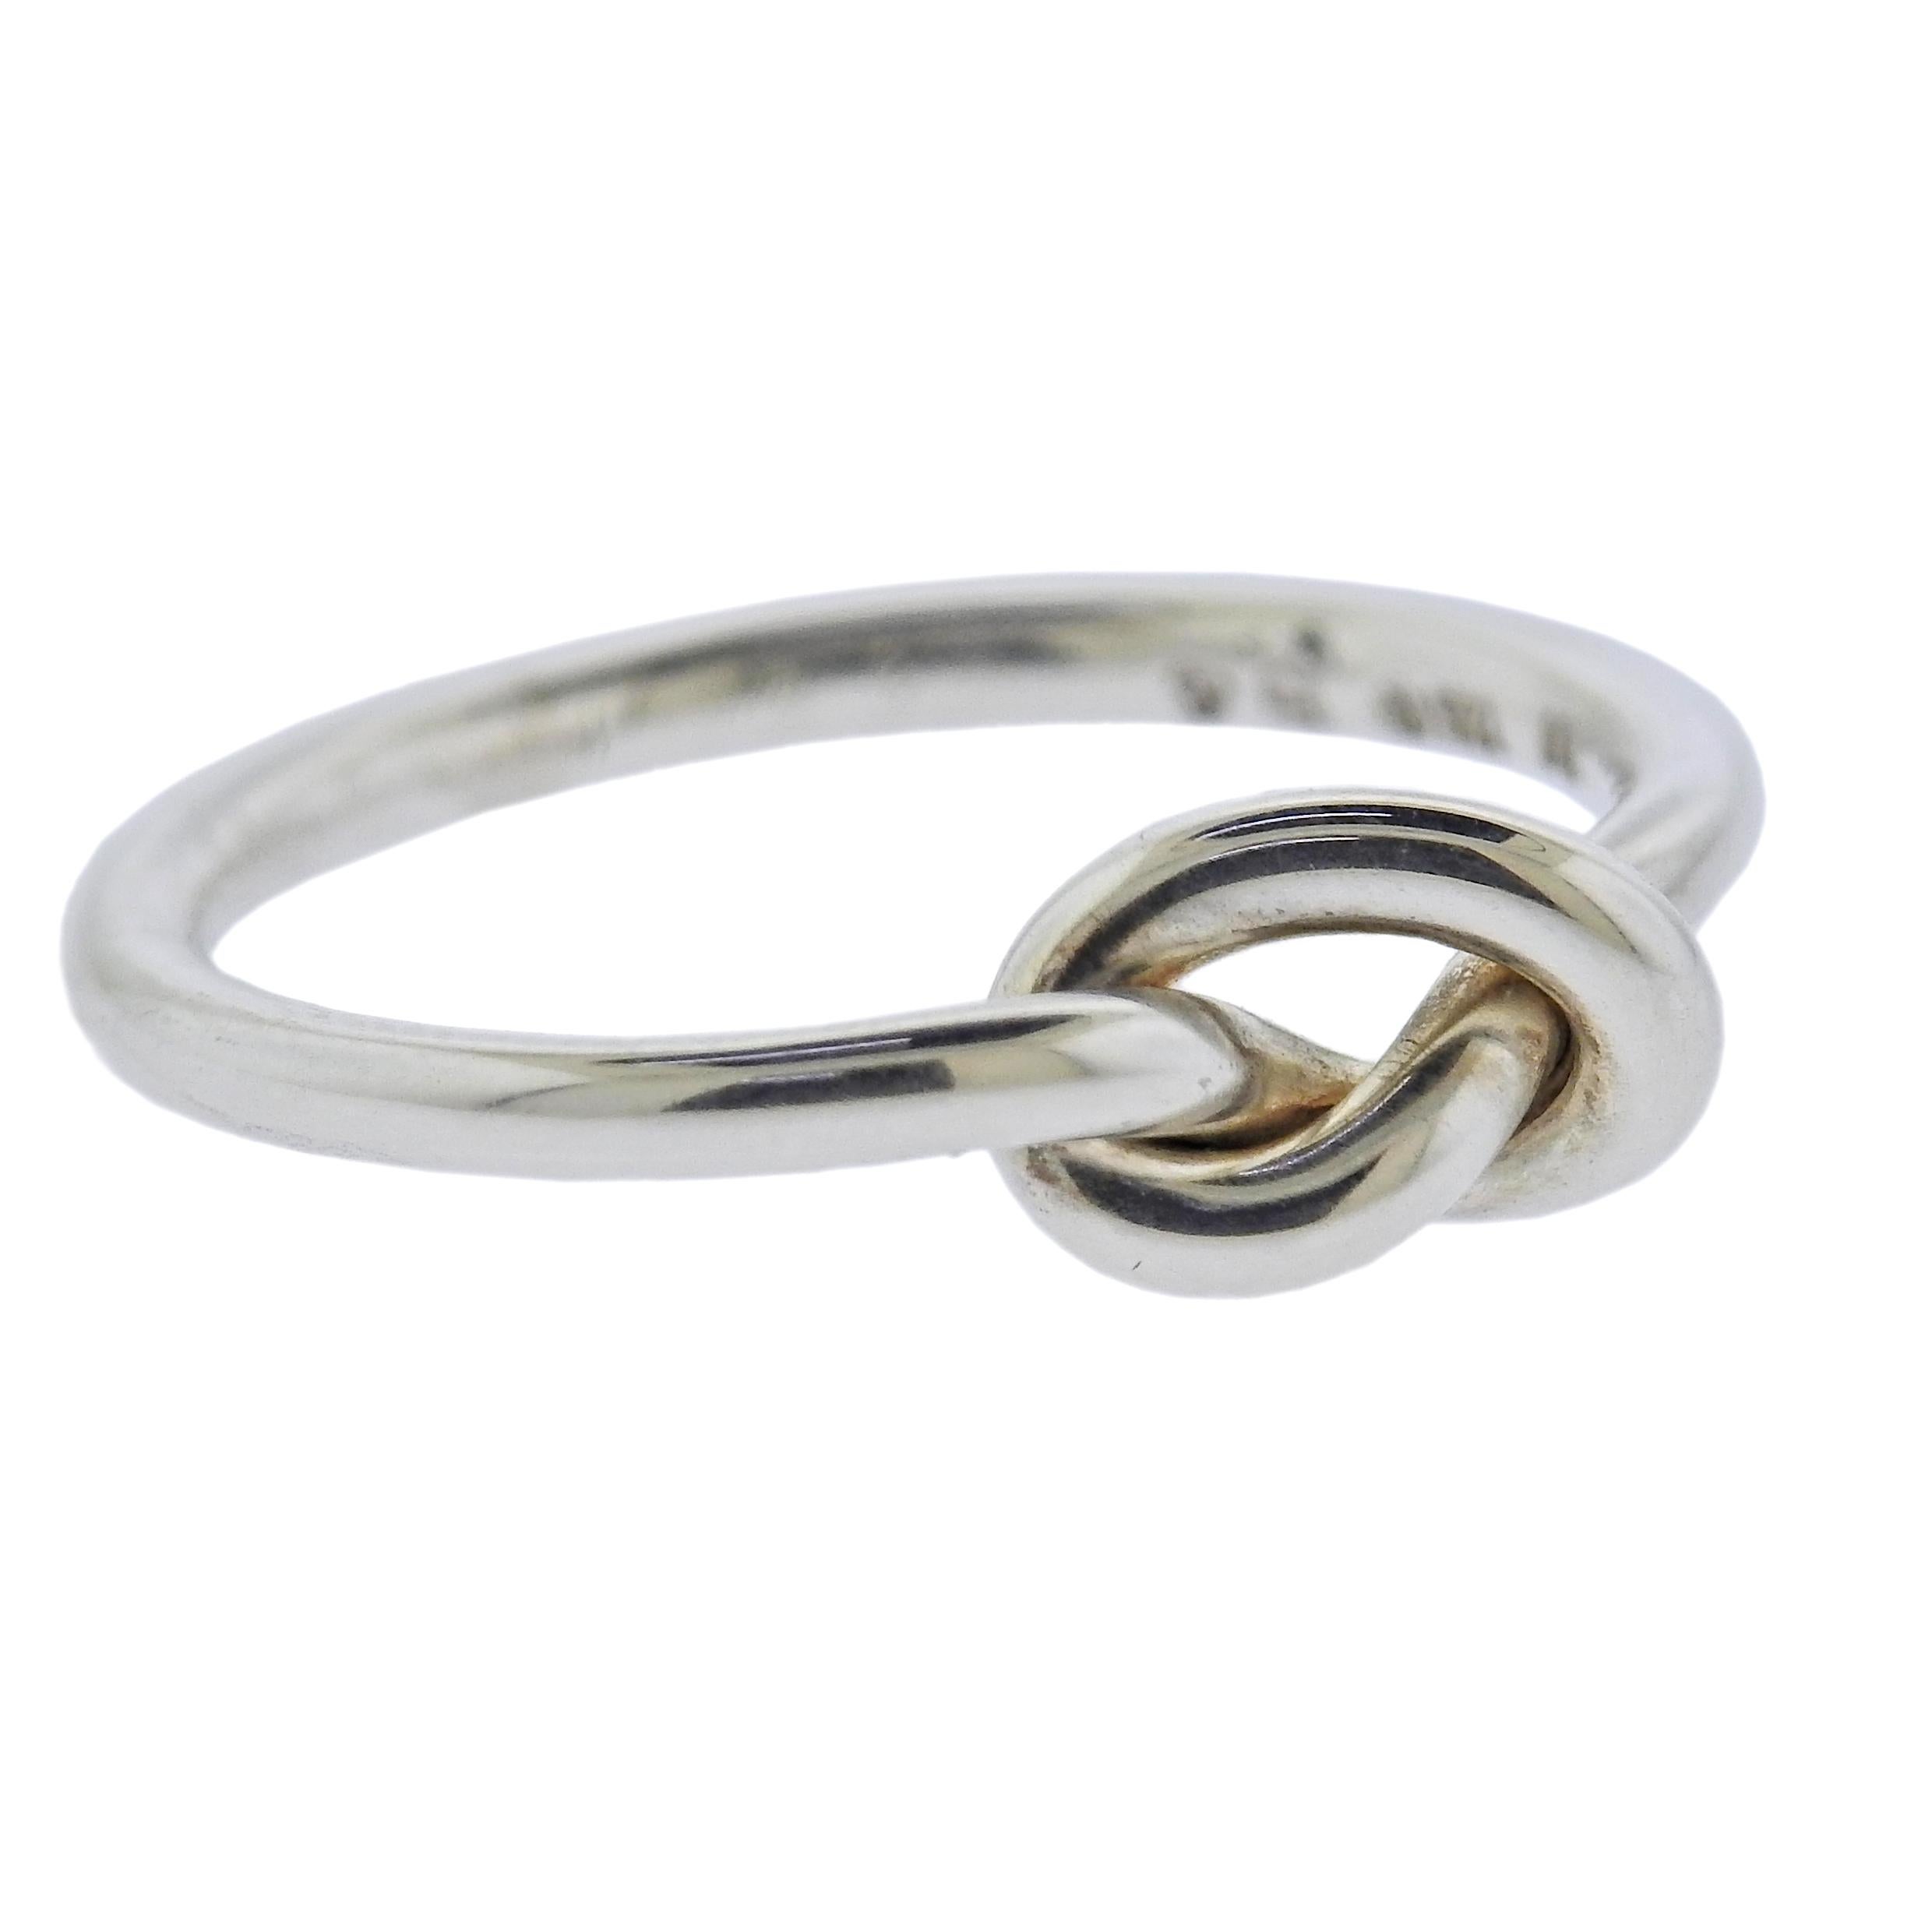 Brand new Georg Jensen sterling silver single Love Knot ring. Knot is 6mm x 9mm.  Ring is available in size 54. Model # 10003871. Marked: GJ 925 S, A44B. Weight - 2.5 grams.